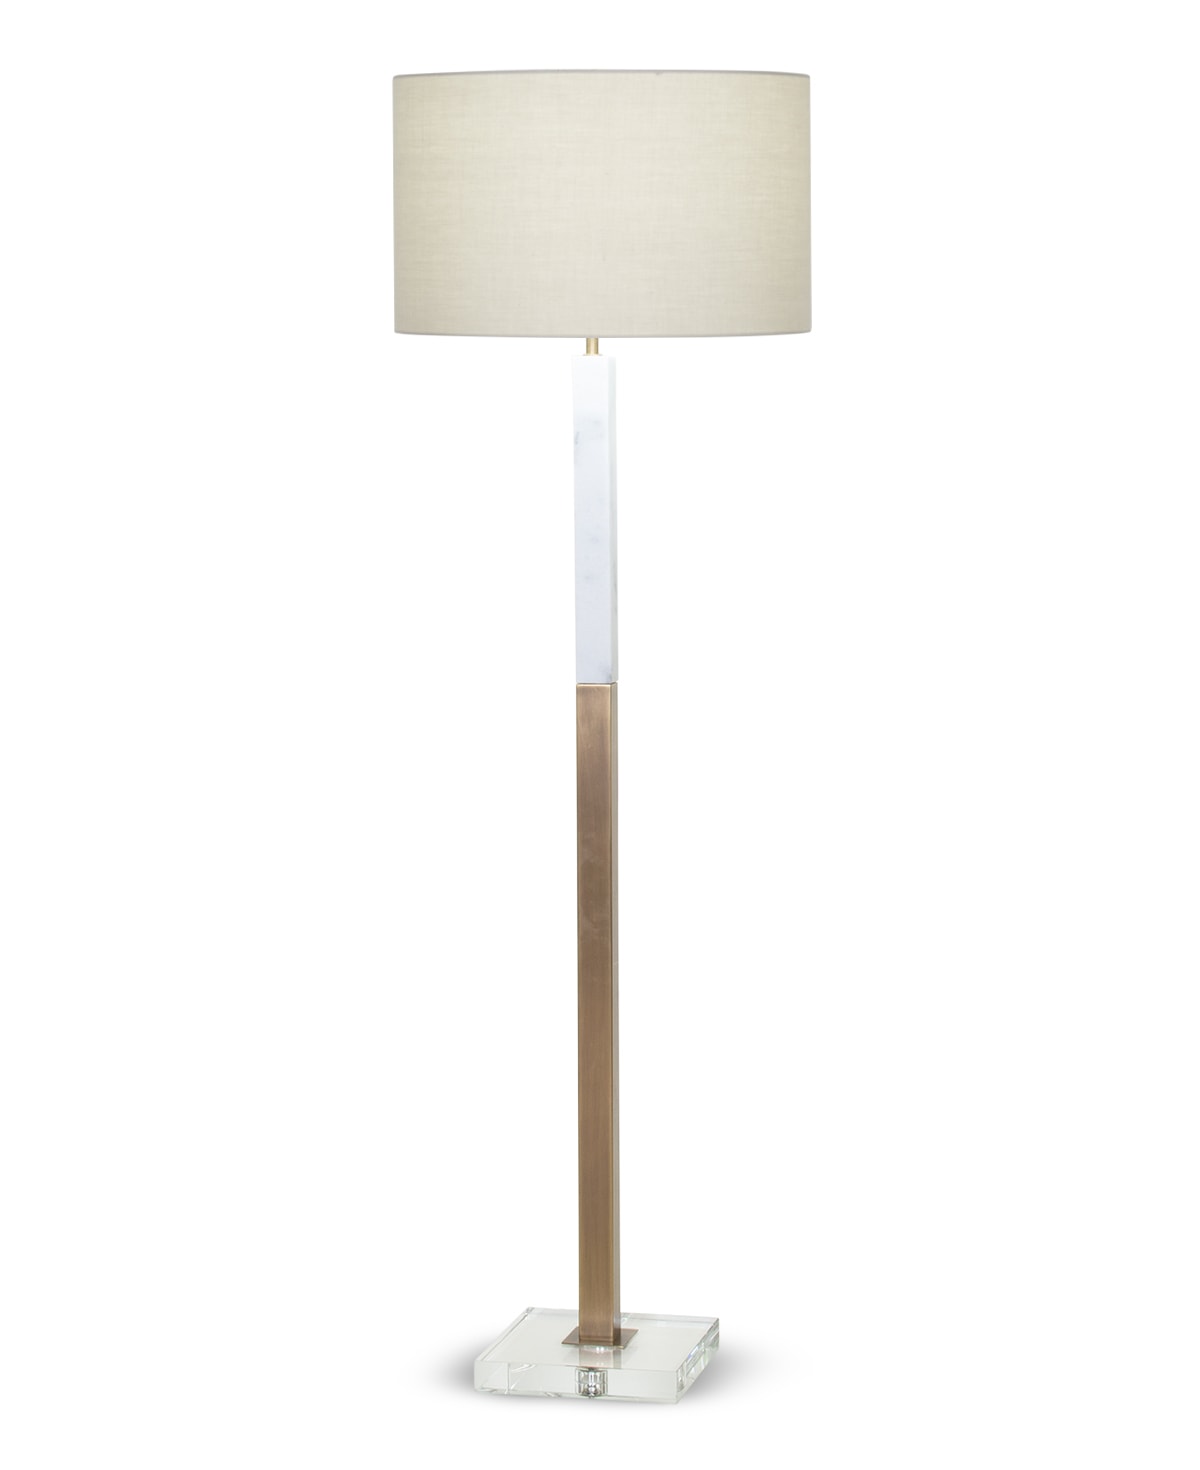 FlowDecor Sanders Floor Lamp in white marble and metal with antique brass finish and crystal and beige cotton drum shade (# 4354)